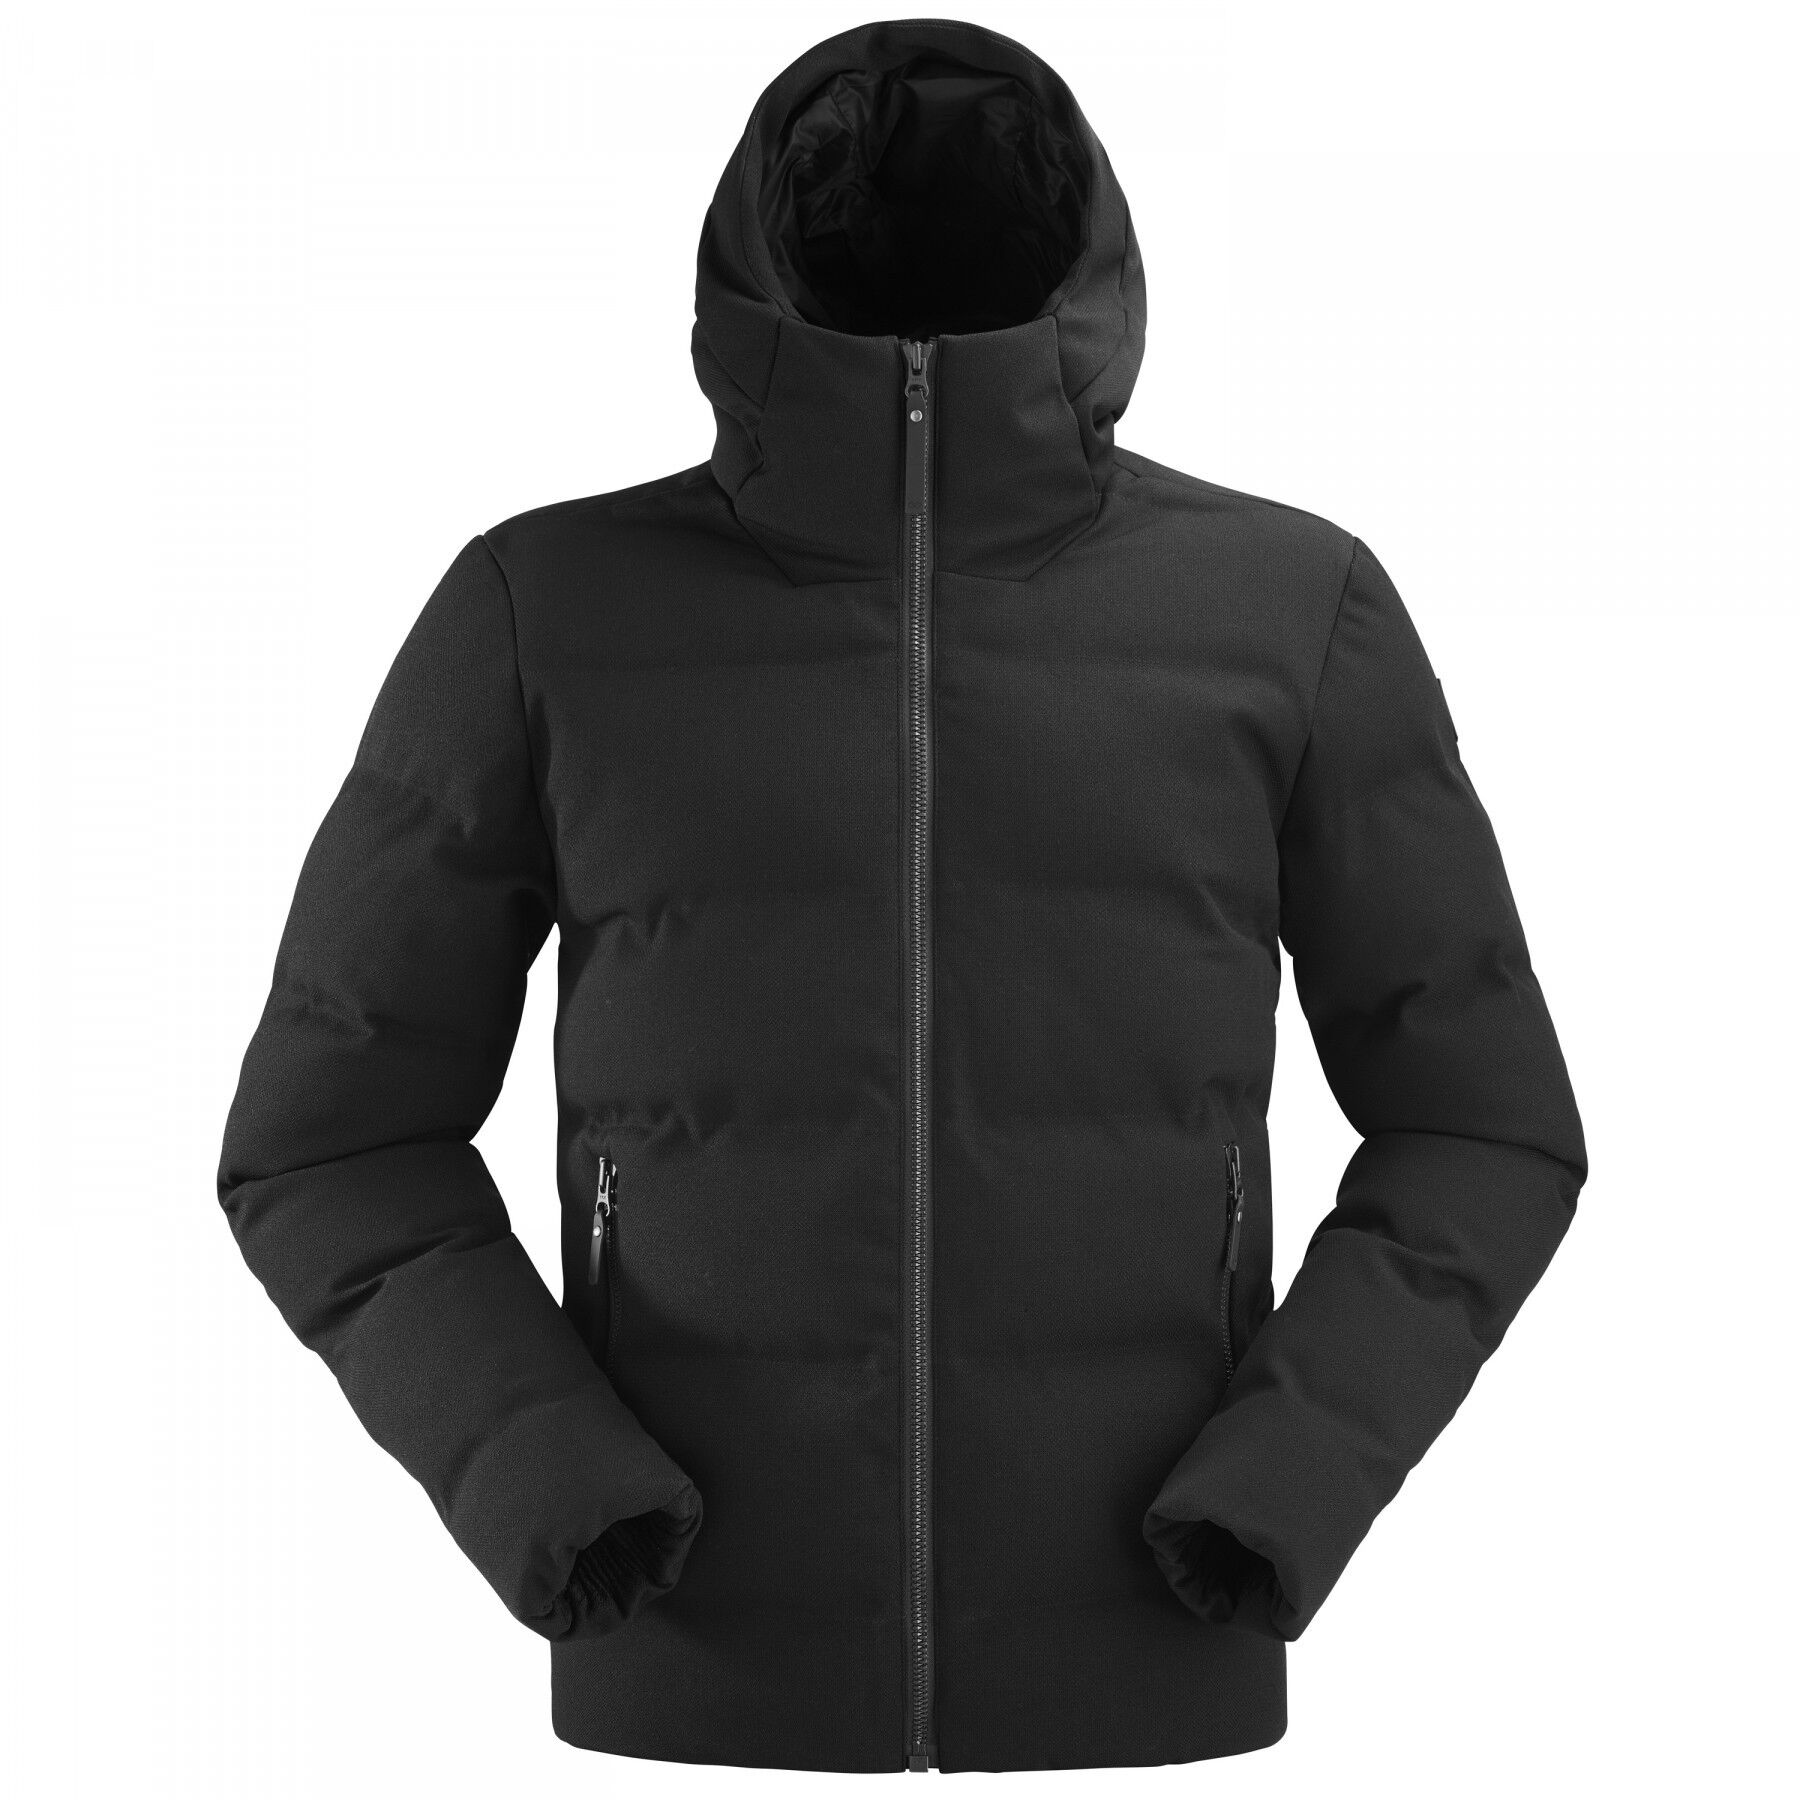 Eider Twin Peaks District Hoodie M - Giacca invernale - Uomo